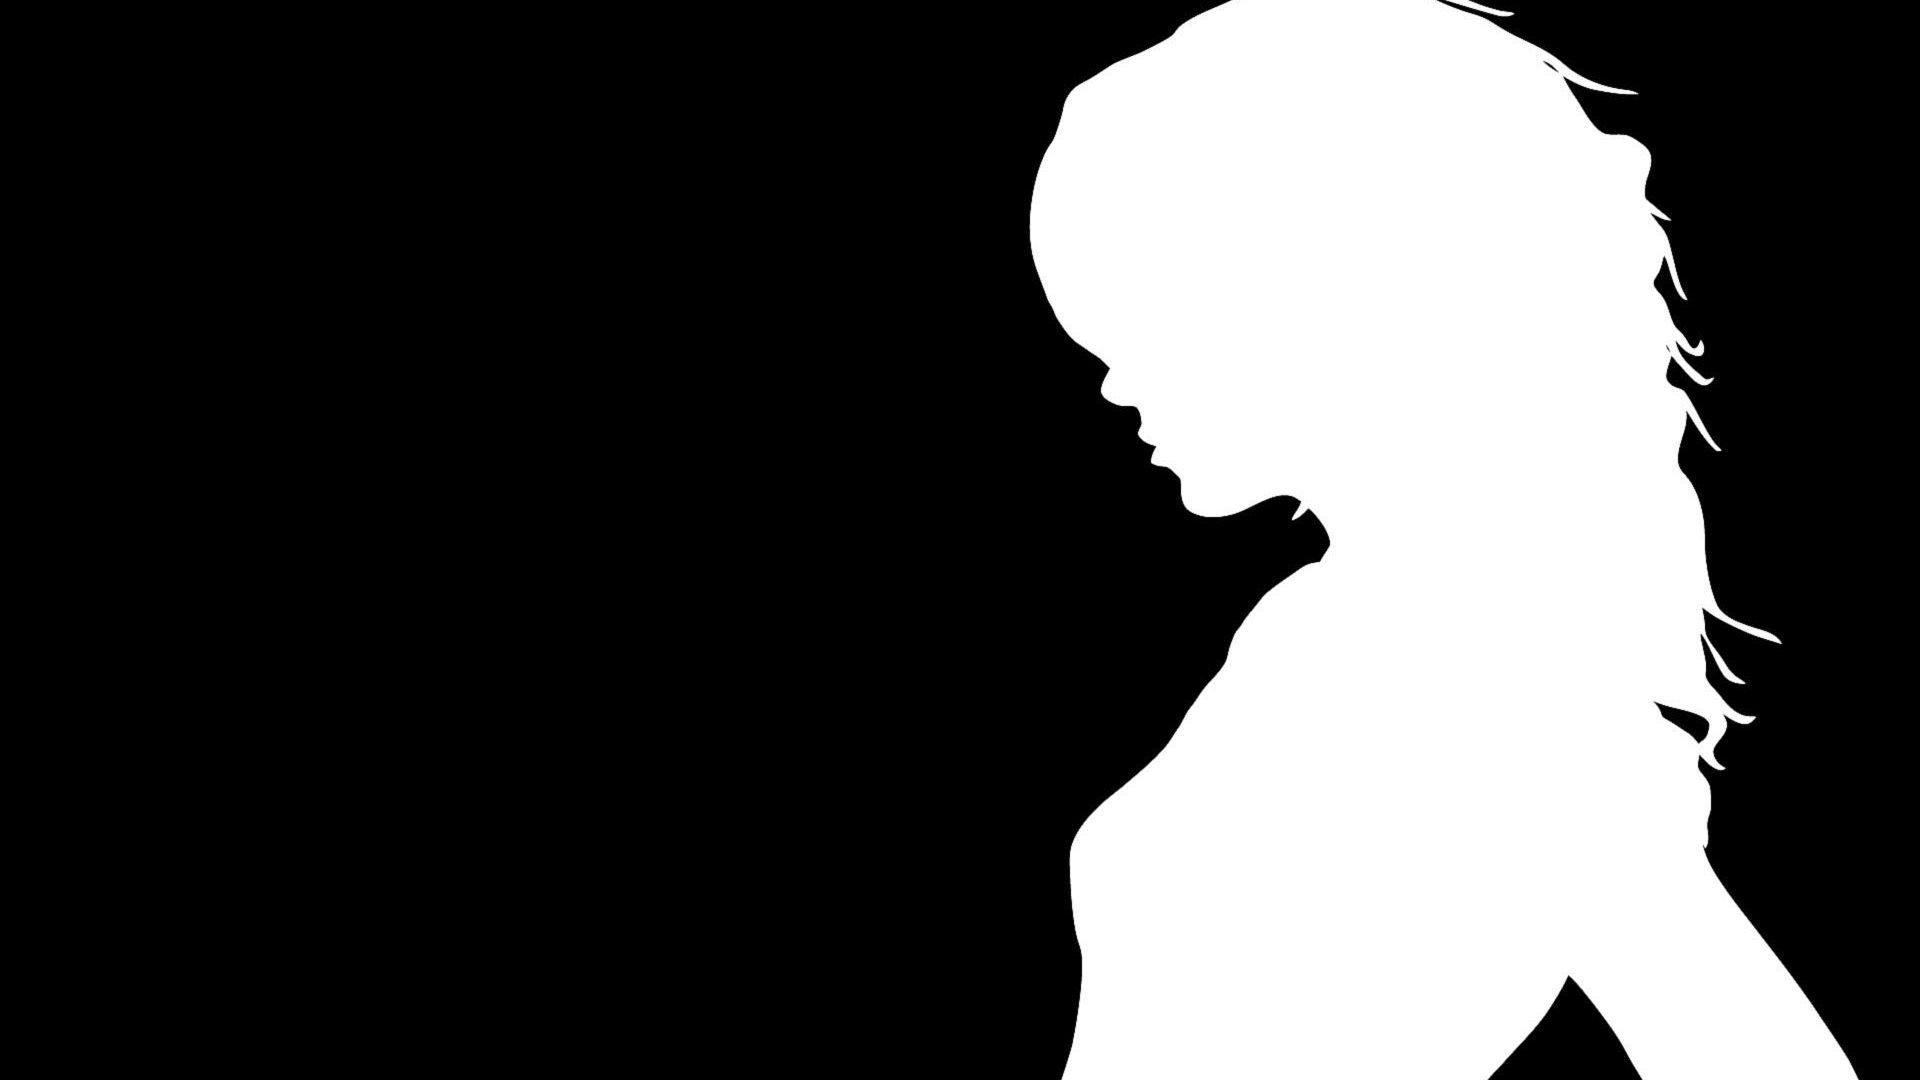 Abstract Women Silhouette Wallpaper Free Abstract Women Silhouette Background